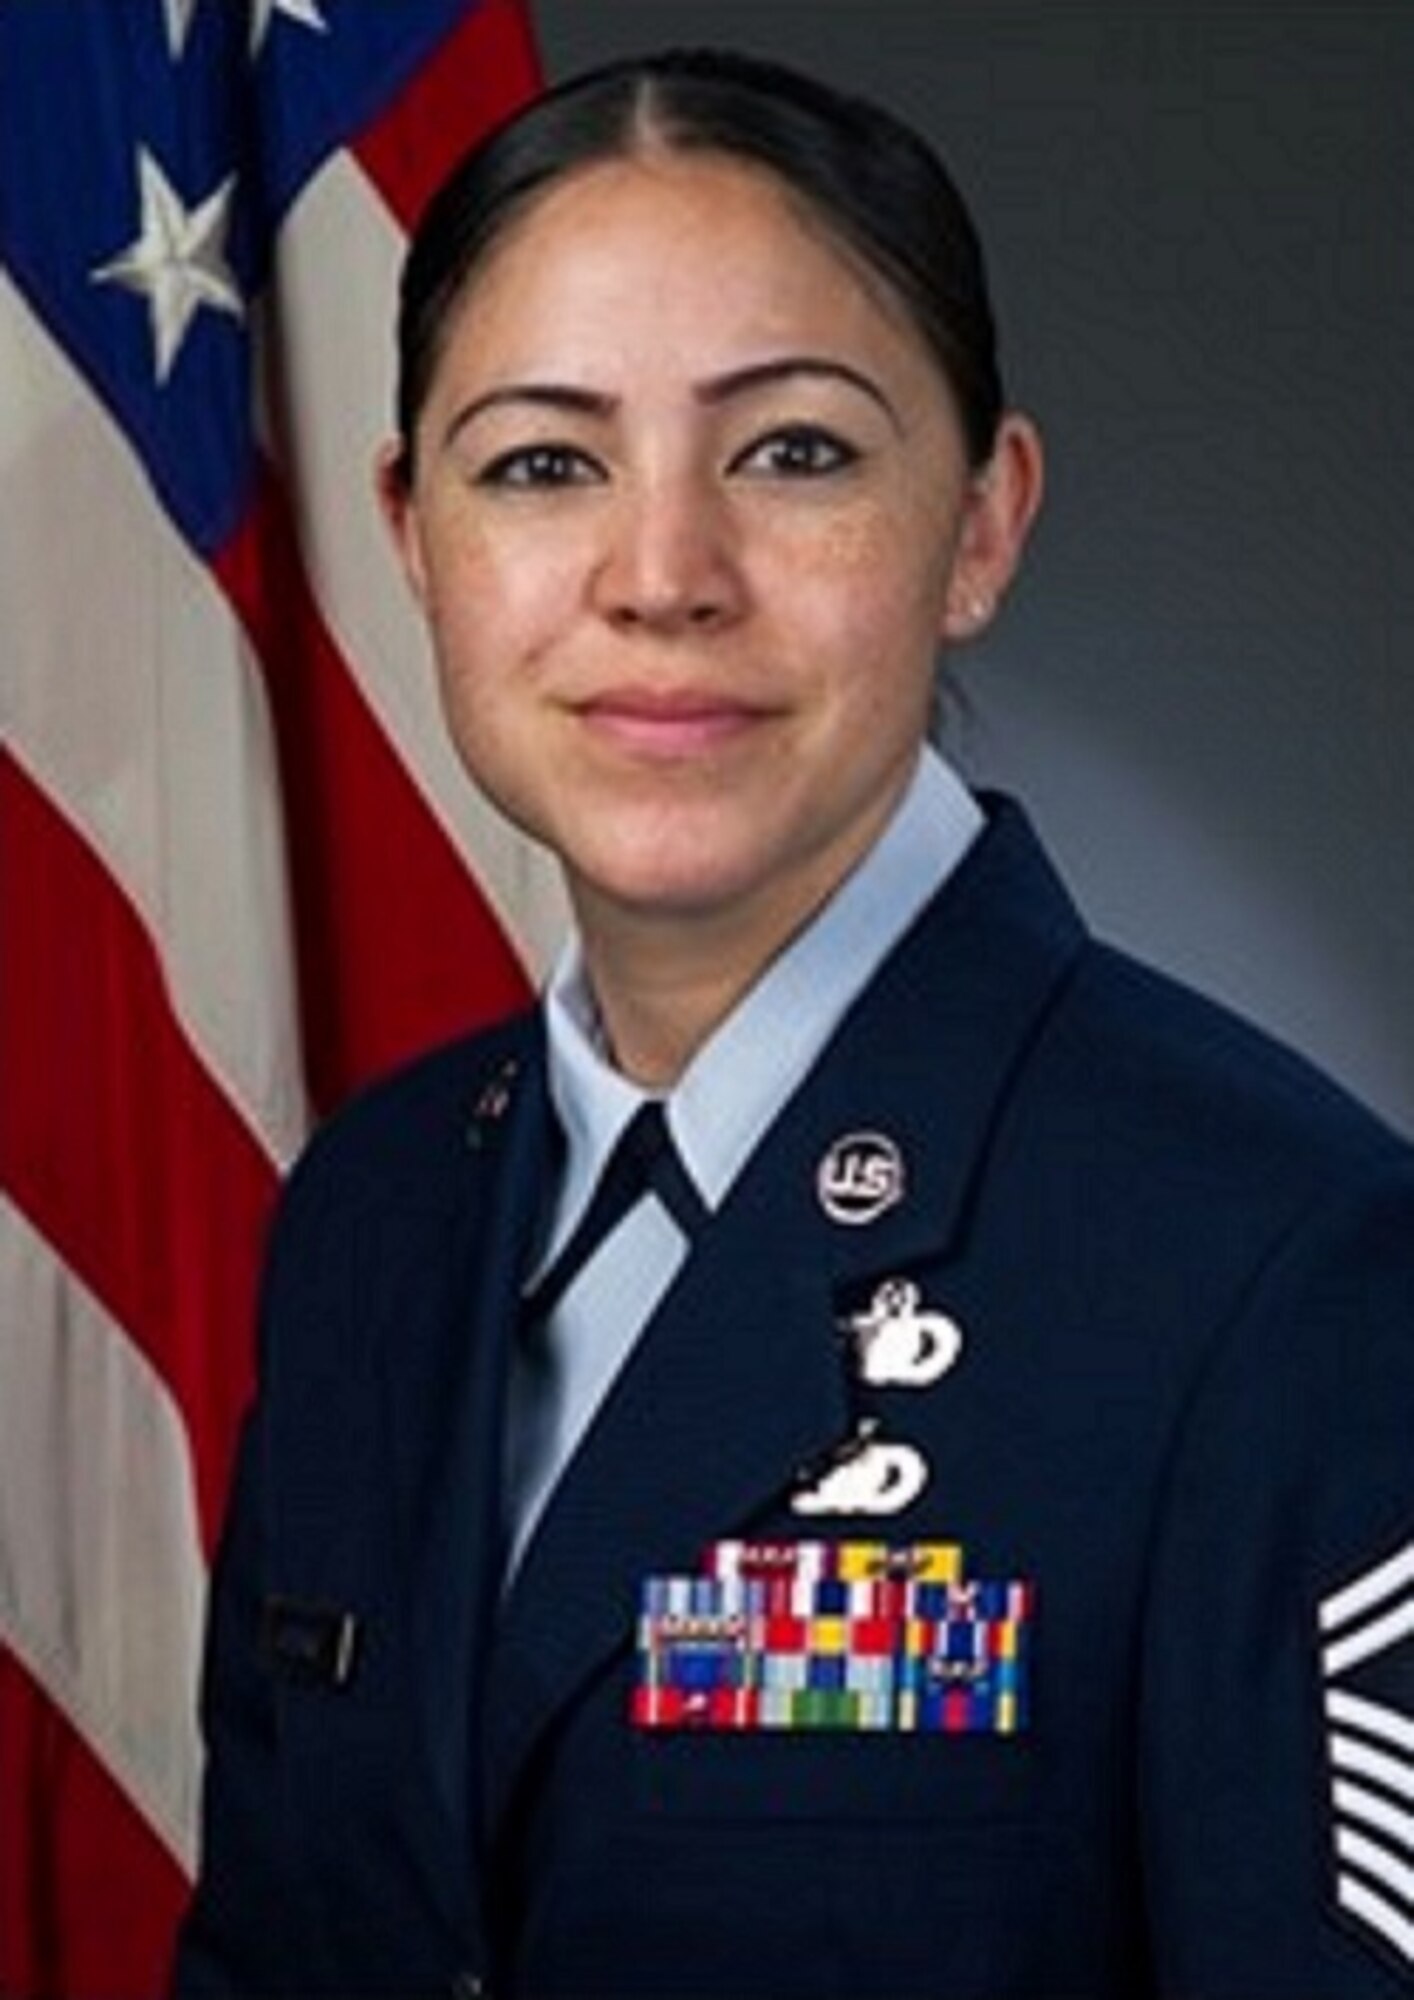 Senior Master Sgt. Kimberly La'Pierre, official photo, U.S. Air Force photo